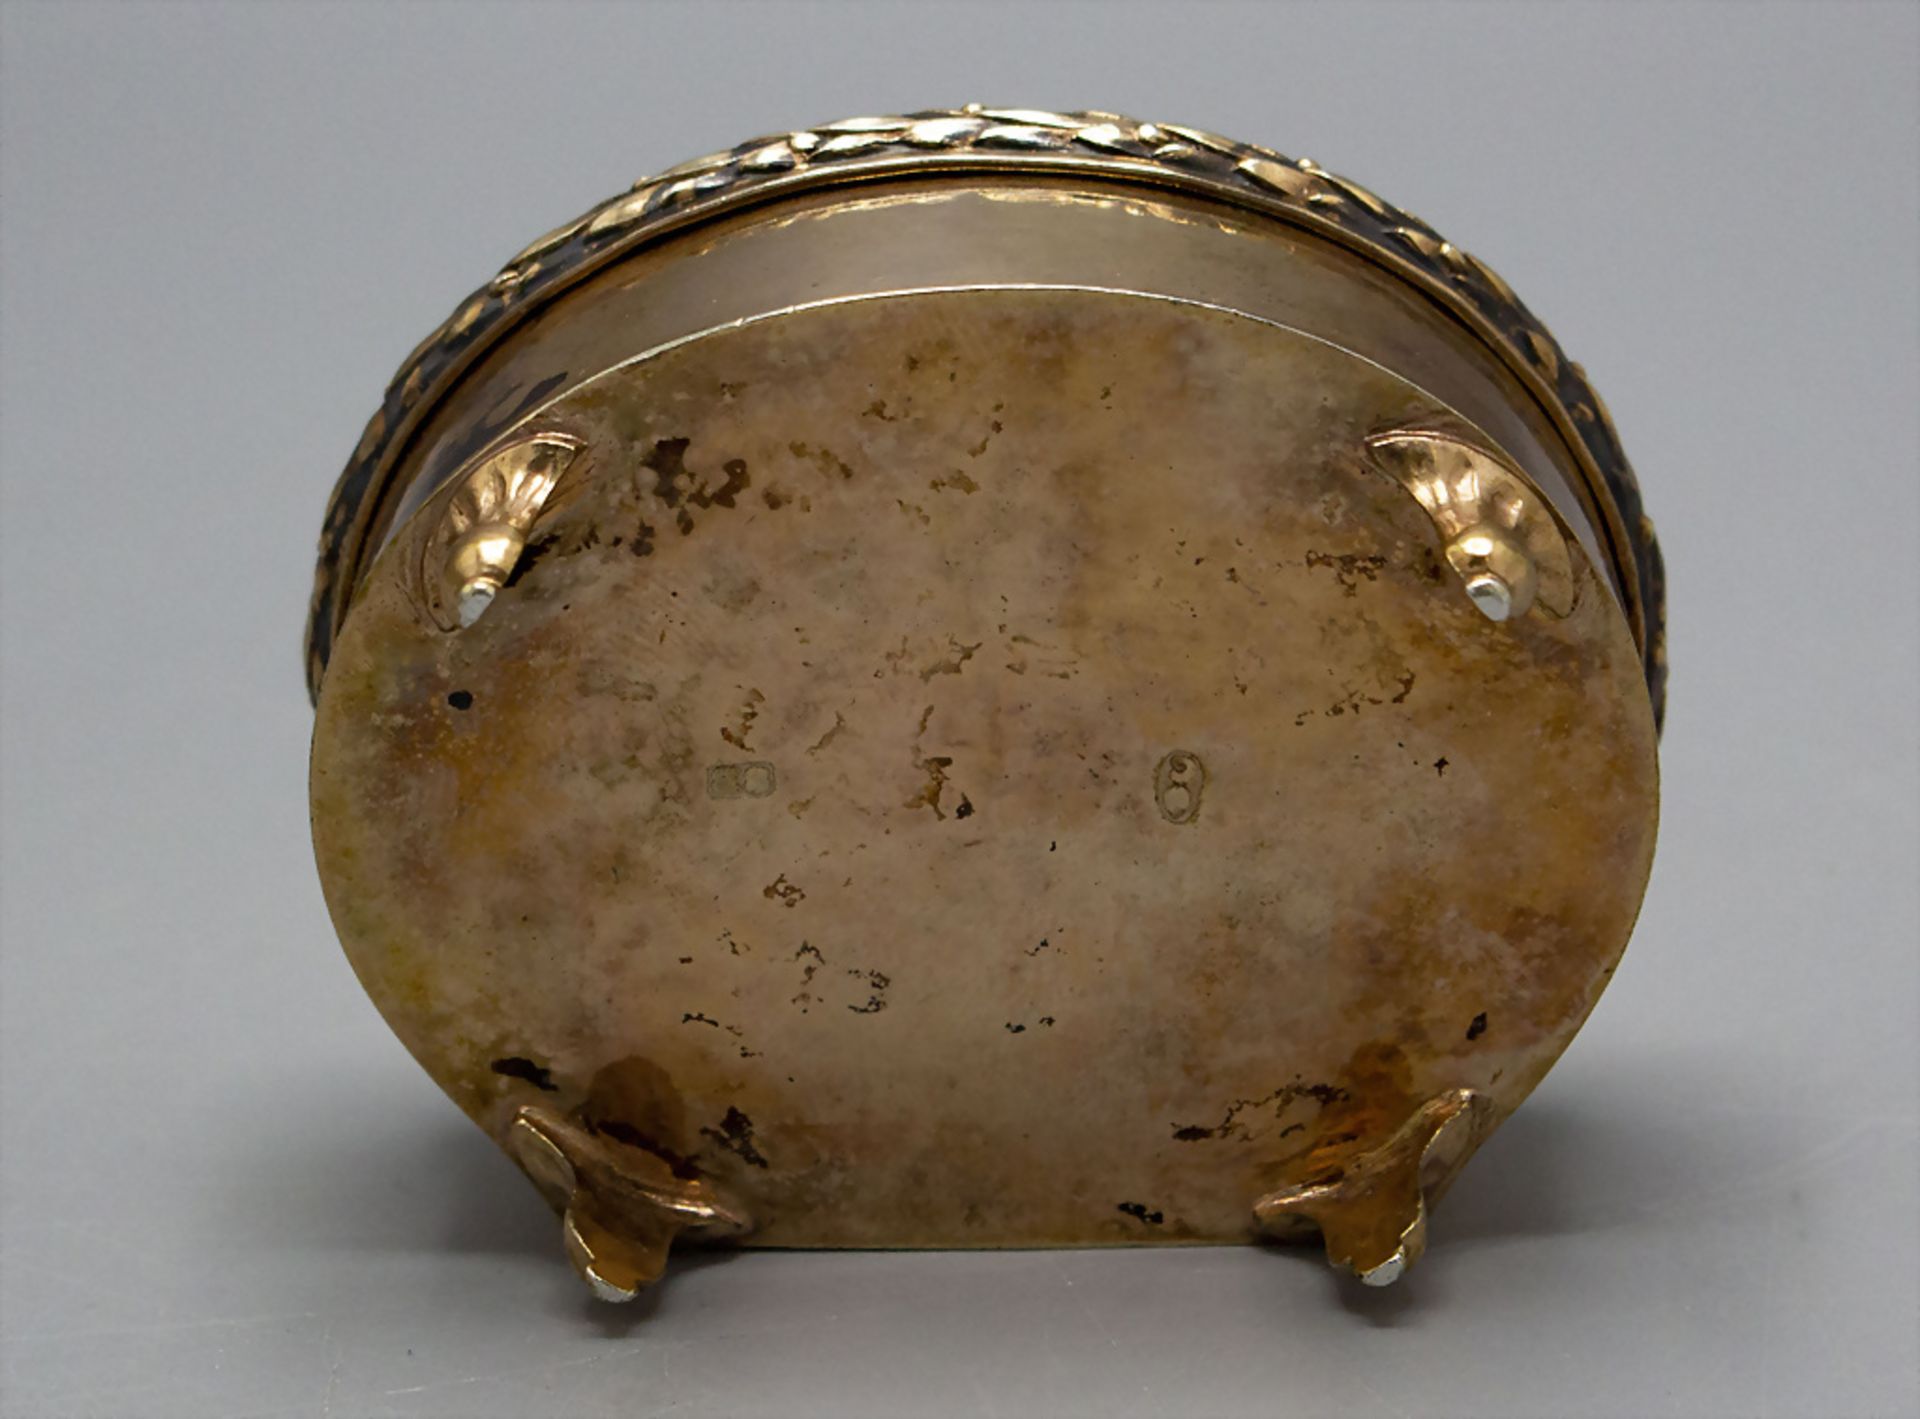 Louis-Seize Tabatiere / A silver snuff box / tobacco box, Samuel Bardet, Augsburg, 1785-1787 - Image 4 of 6